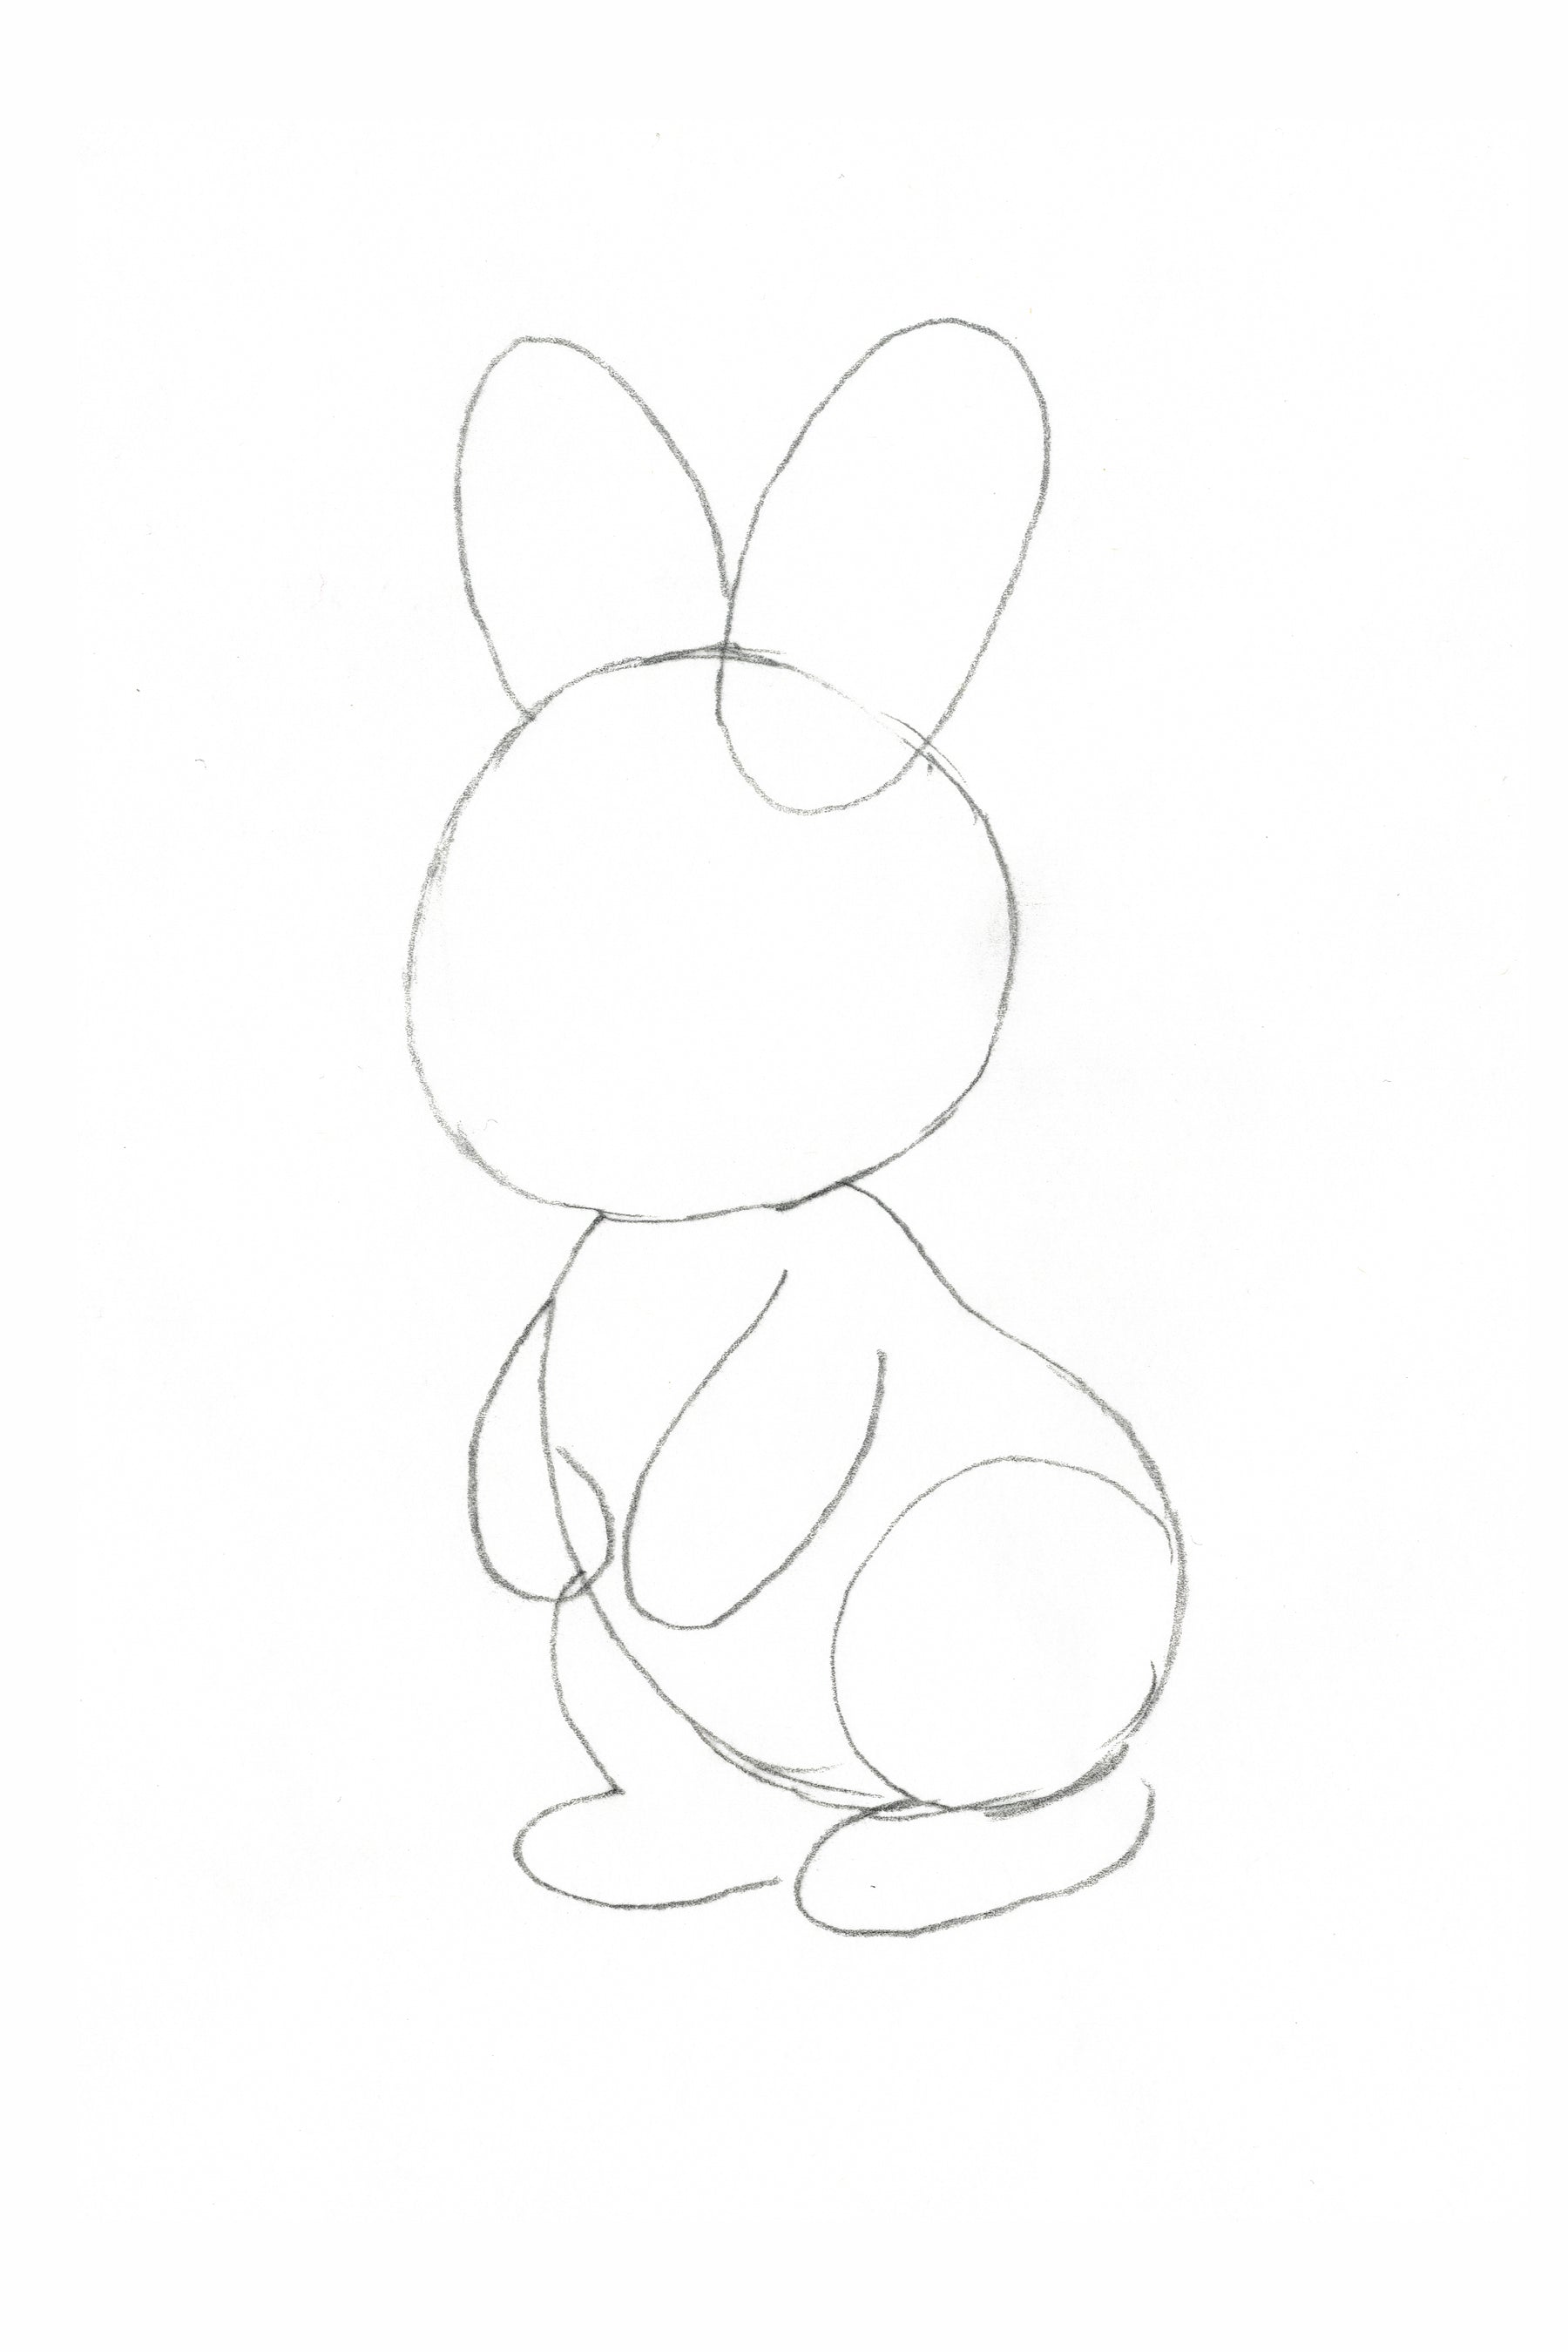 How to draw a bunny. Step-by-step drawing tutorial.